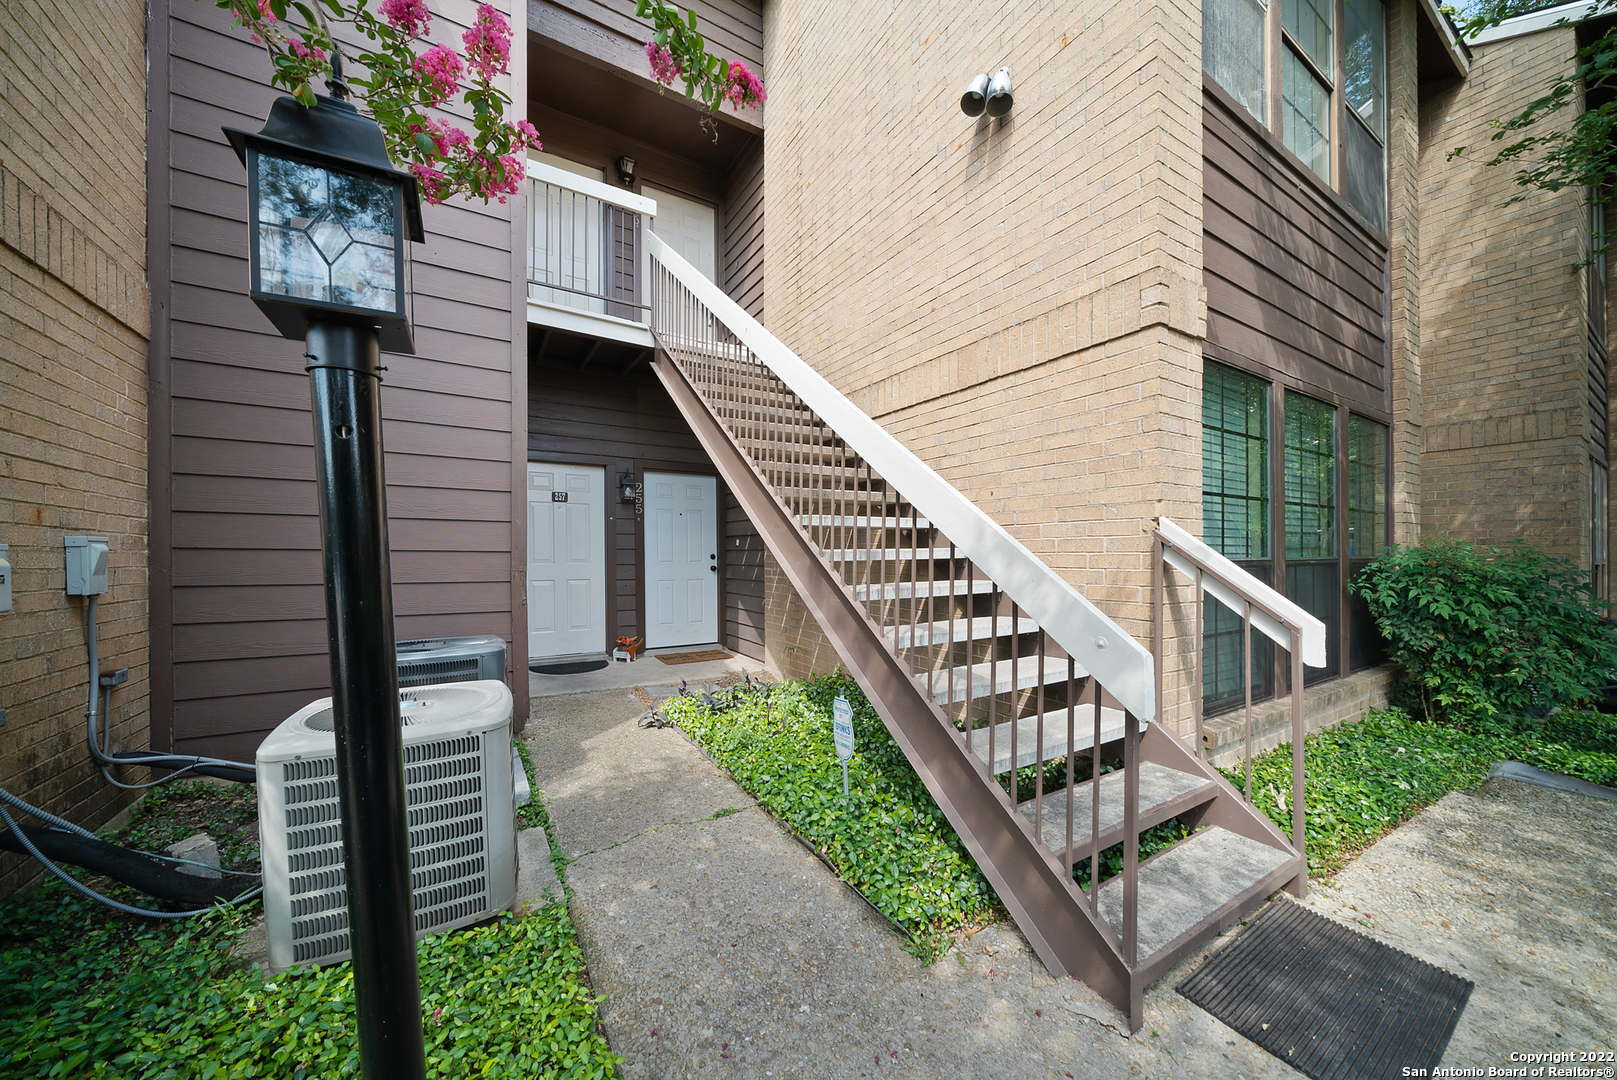 LOCATION LOCATION LOCATION!!! Come view this 1 bedroom / 1 bathroom condo on the second floor with beautiful skylights & pool views. All appliances are included in this sale. This home is conveniently located off I-10, minutes away to the medical center, UTSA, and close to plenty of restaurants & shopping. Pointe North HOA include; exterior, 1 Assigned Parking, Water, Trash, Landscaping, monthly pest control, clubhouse & pool. If your looking for investment opportunity, this community allows for short term rentals with a 30 day minimum requirement.